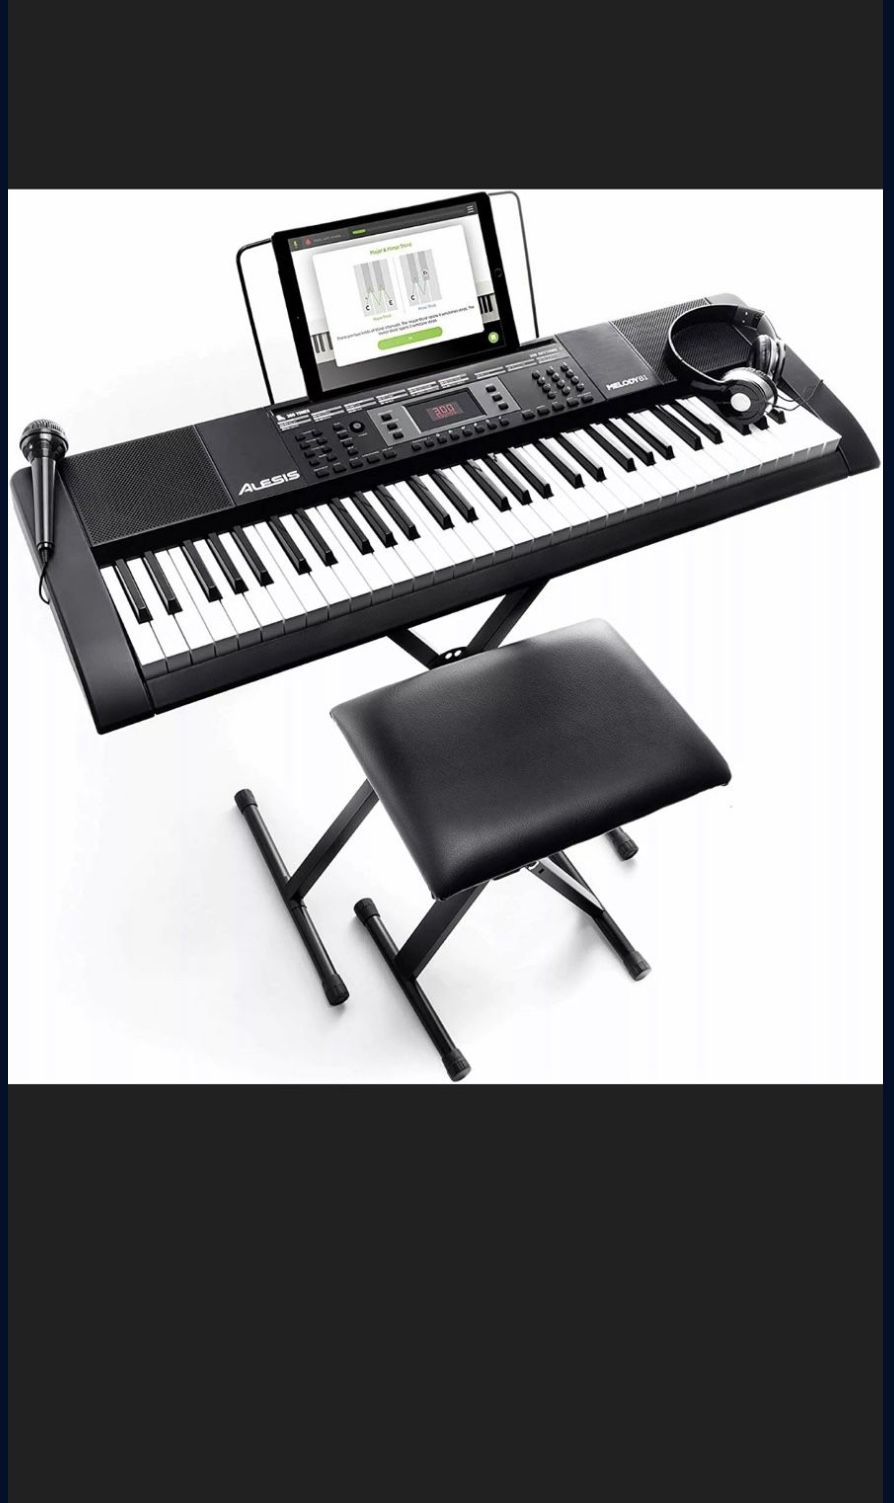 Alesis Melody 61 MKII | 61 Key Portable Keyboard with Built In Speakers, Headphones, Stand